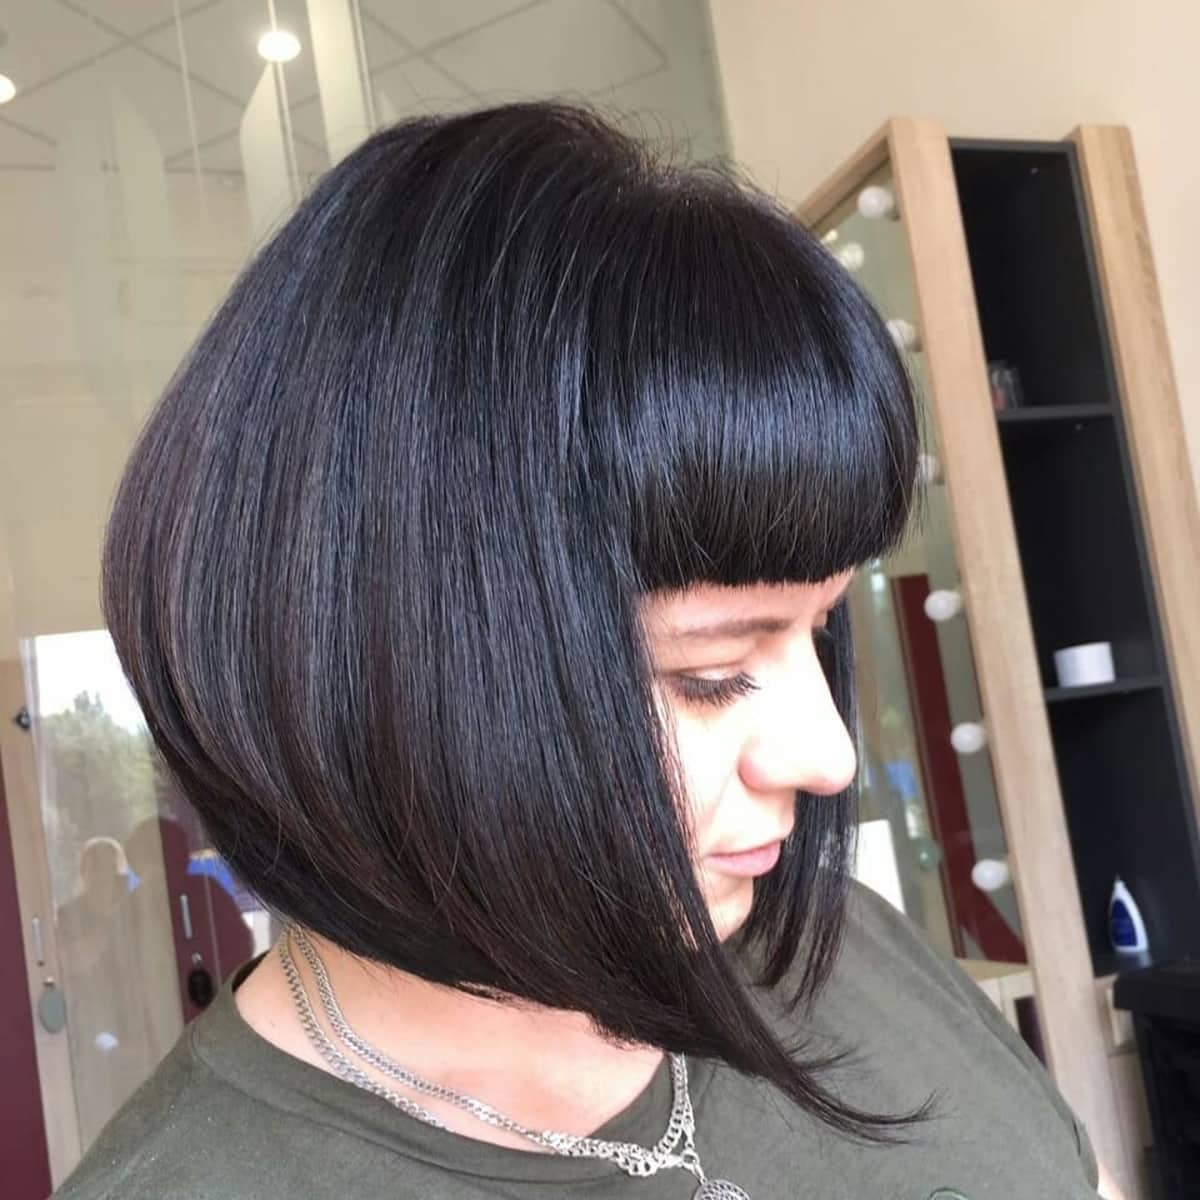 short stacked bob hairstyle with bangs